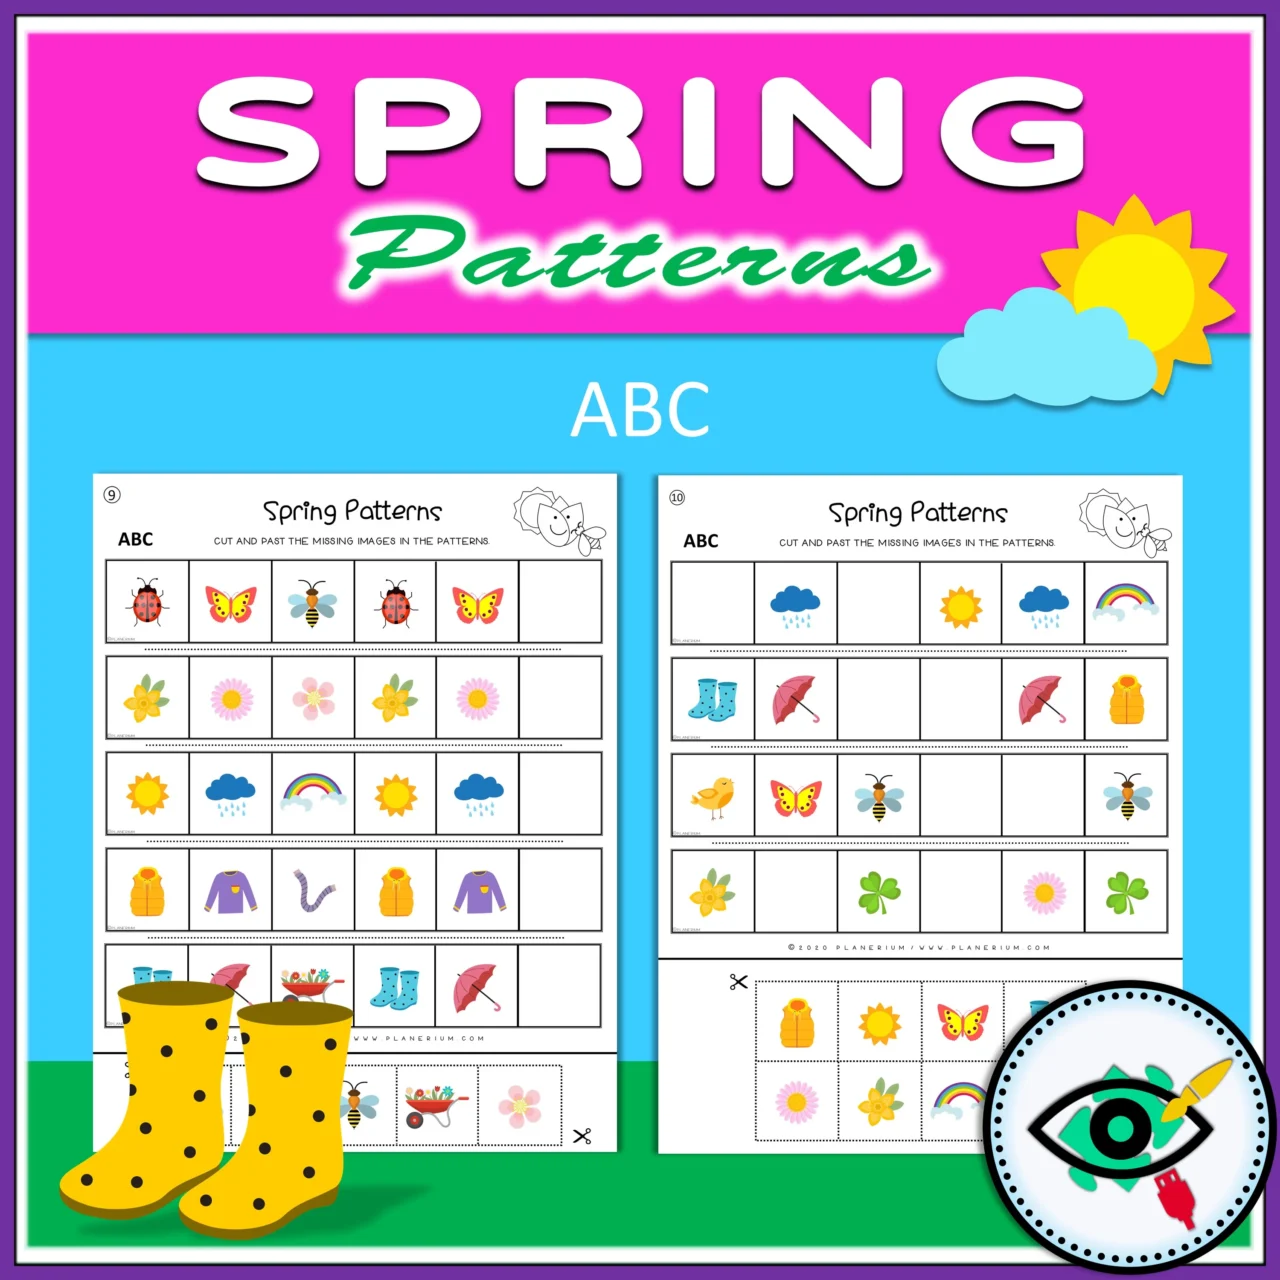 Spring - Patterns Activity - Image Title 6